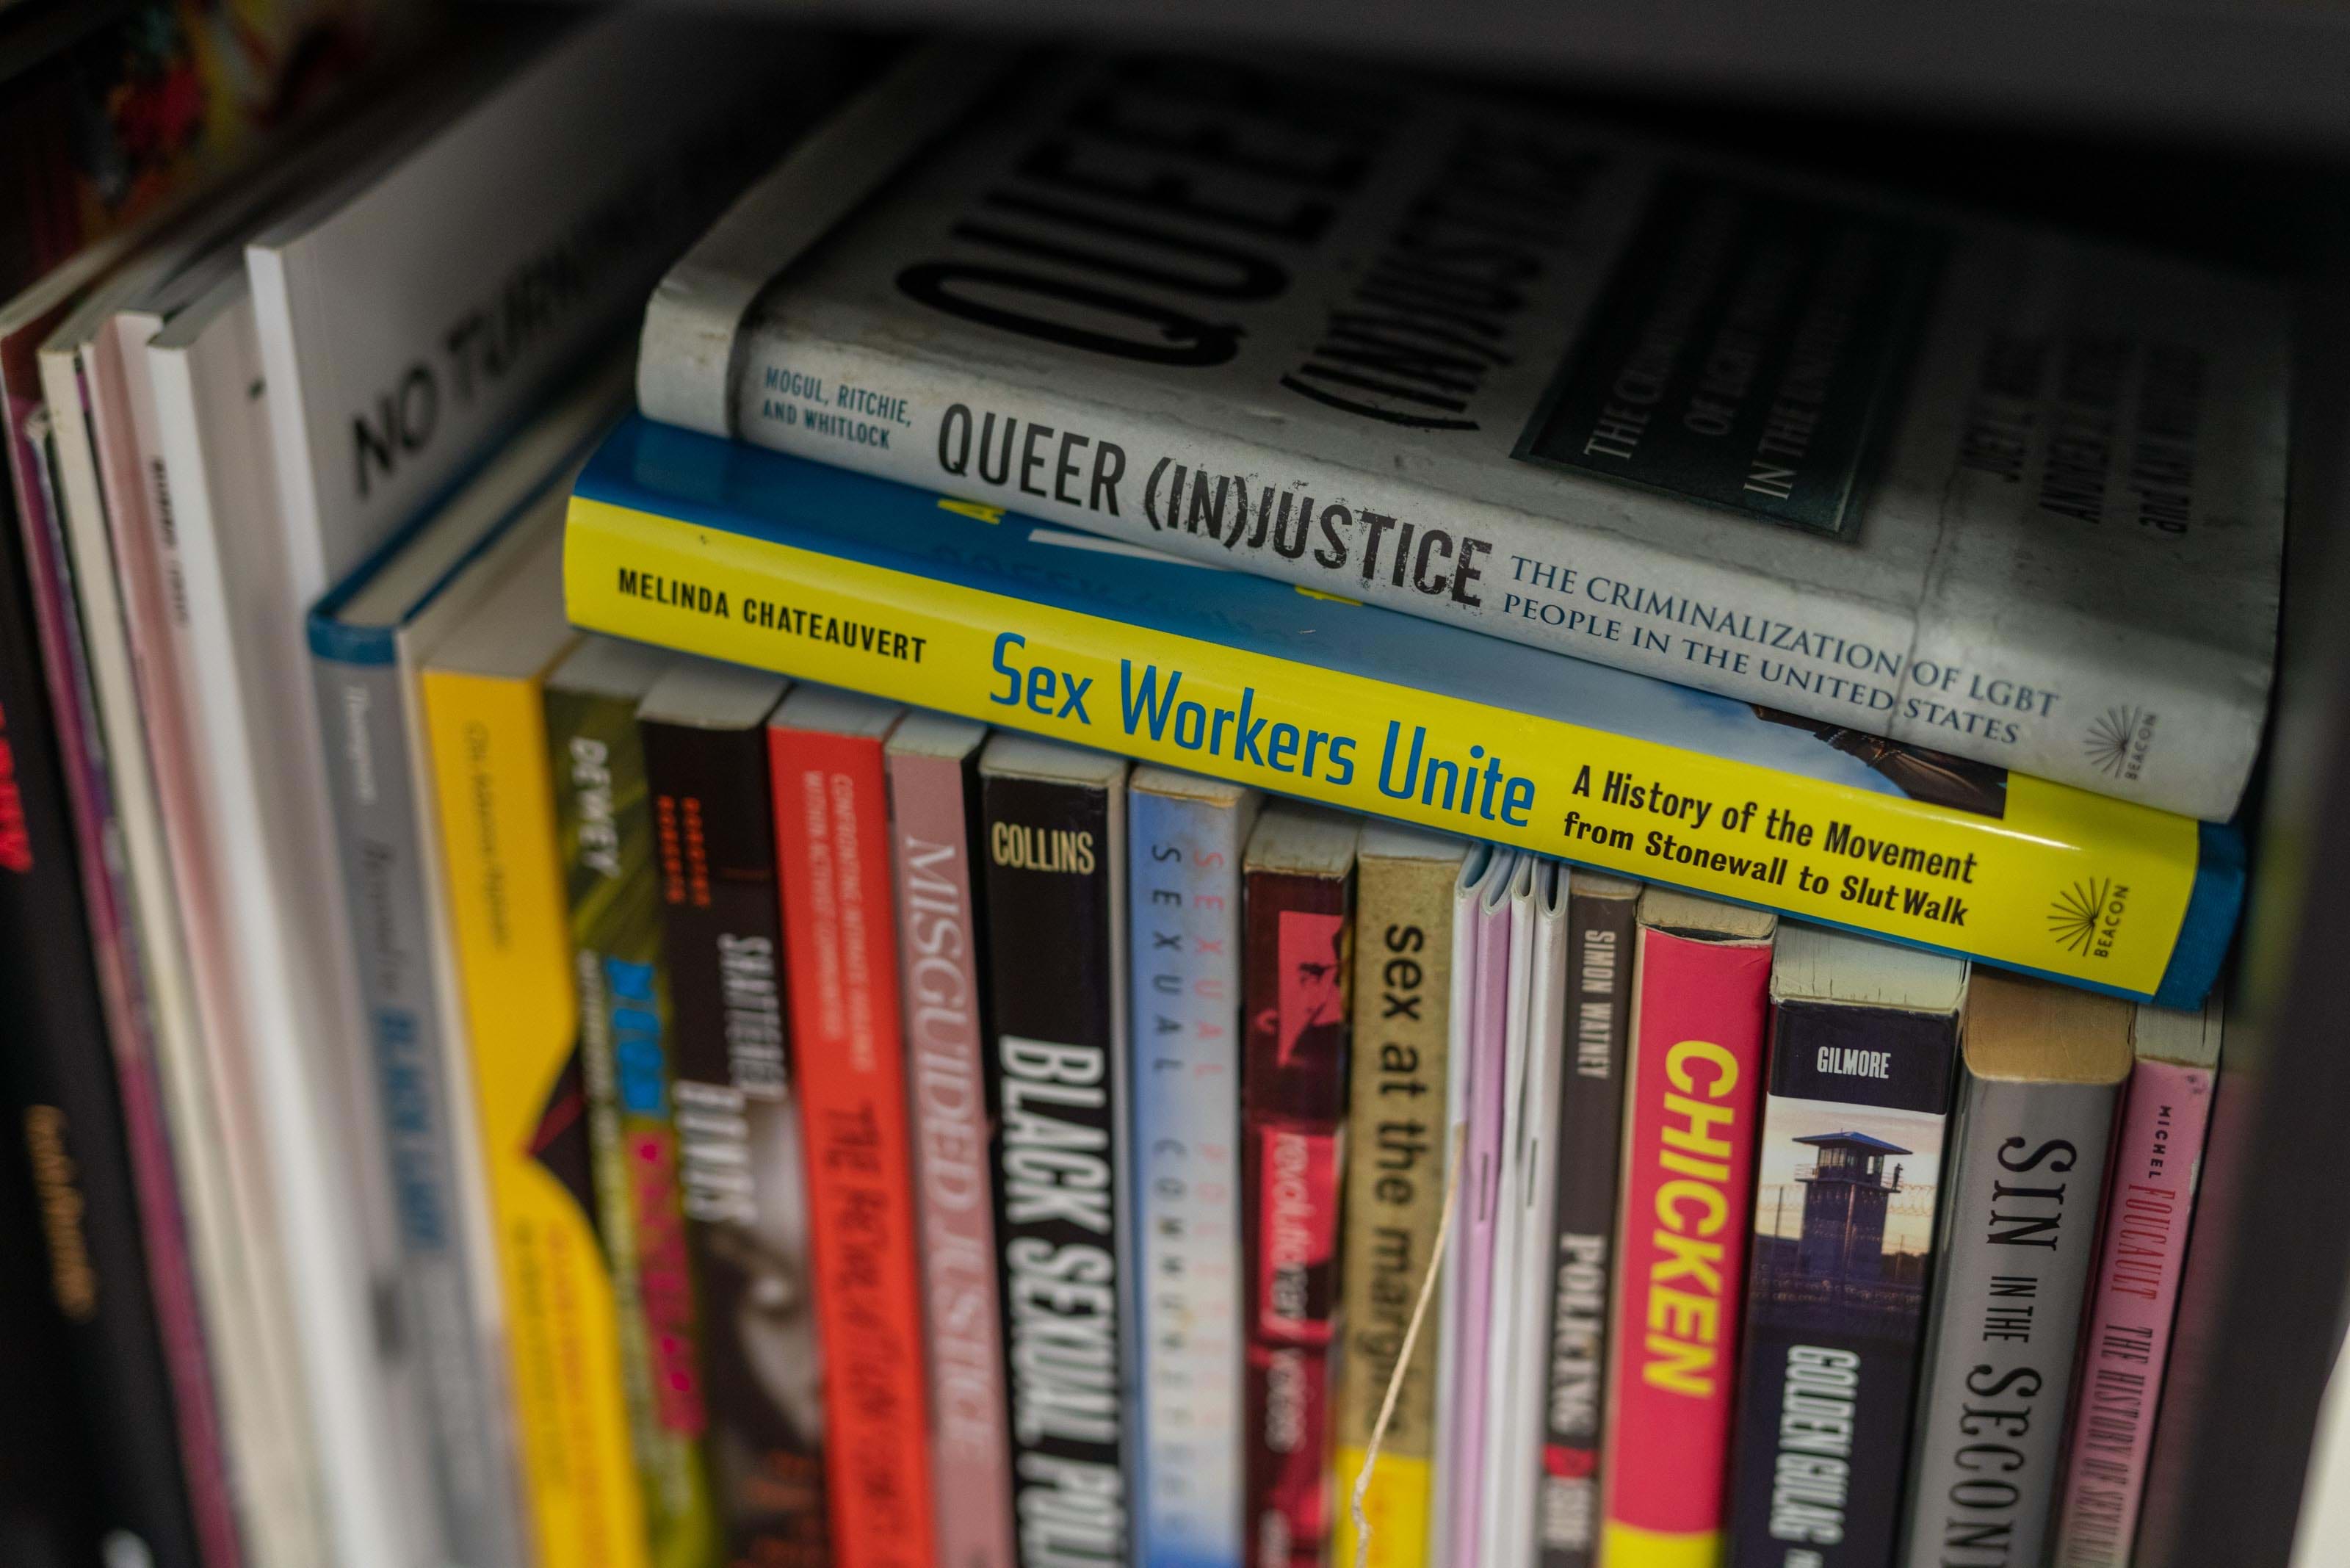 A close-up of a bookshelf tightly packed with titles that include “Queer (In)Justice” and “Sex Workers Unite.”